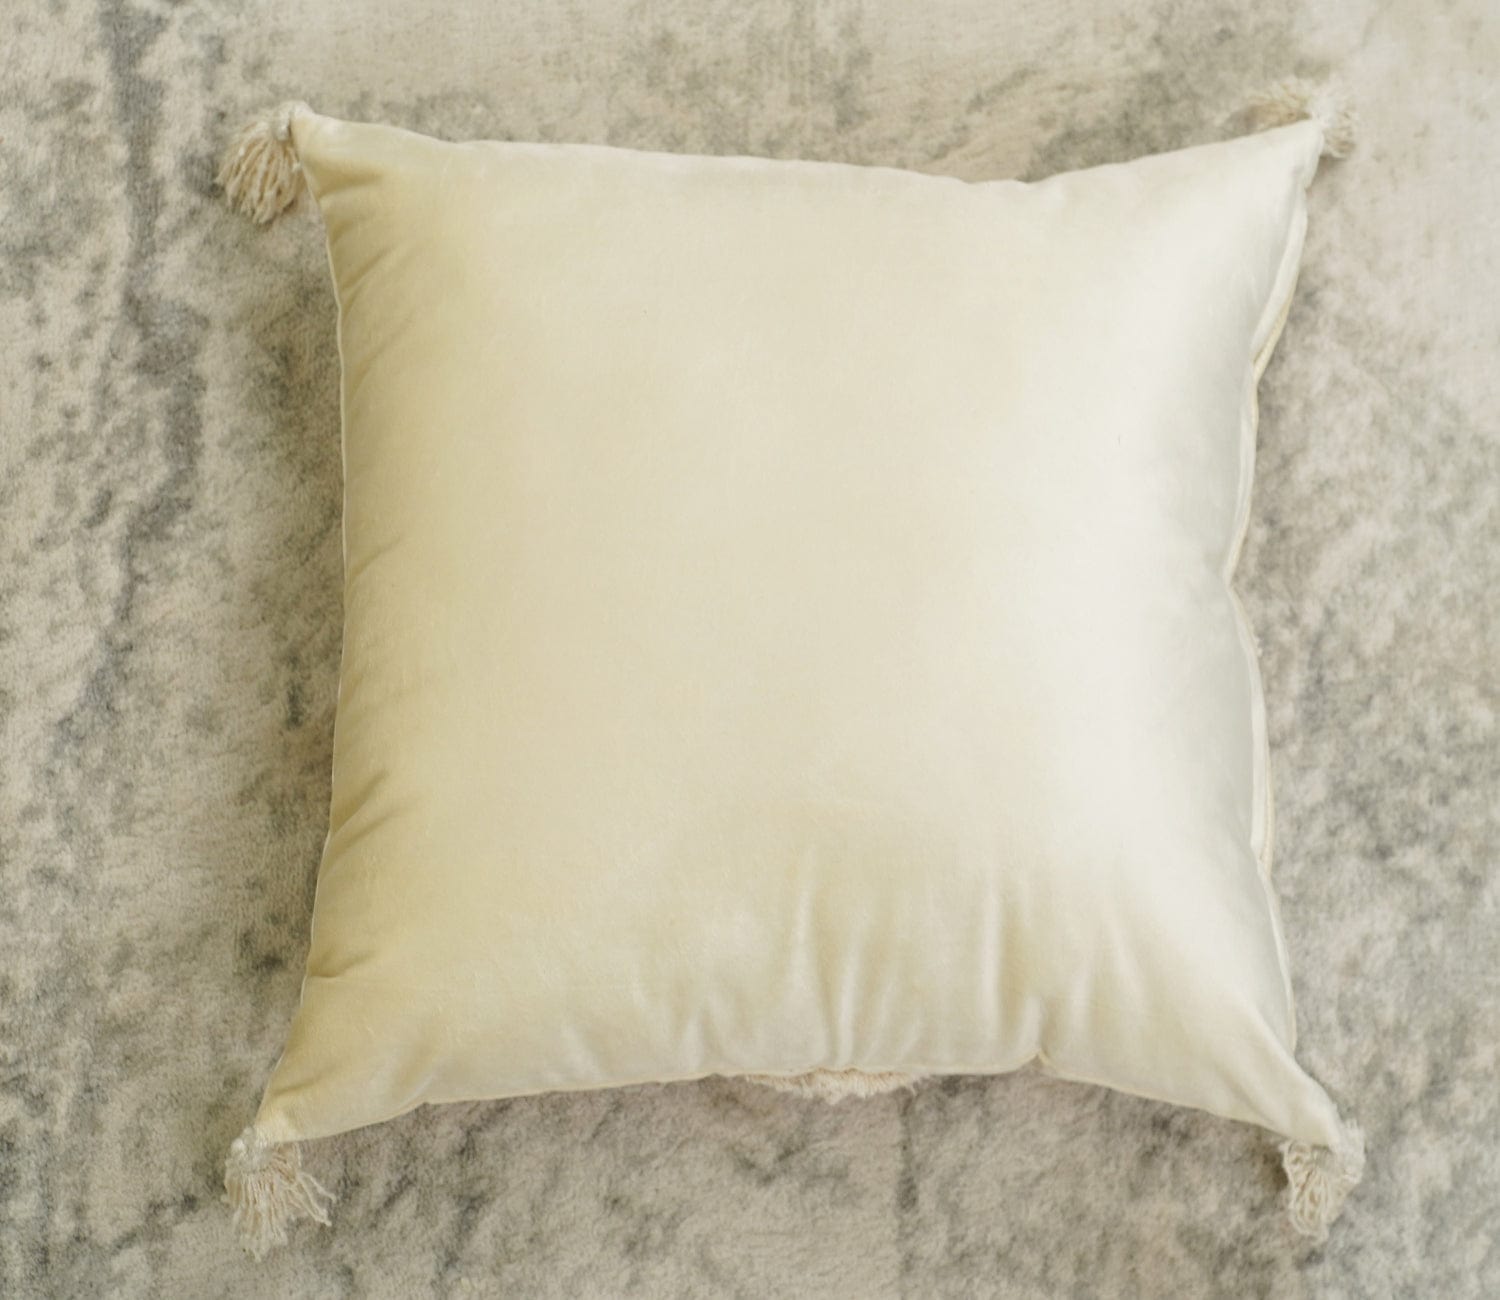 Super Soft Velvet Cushion Covers - Set of 2 (18 x 18 inches,ivory)